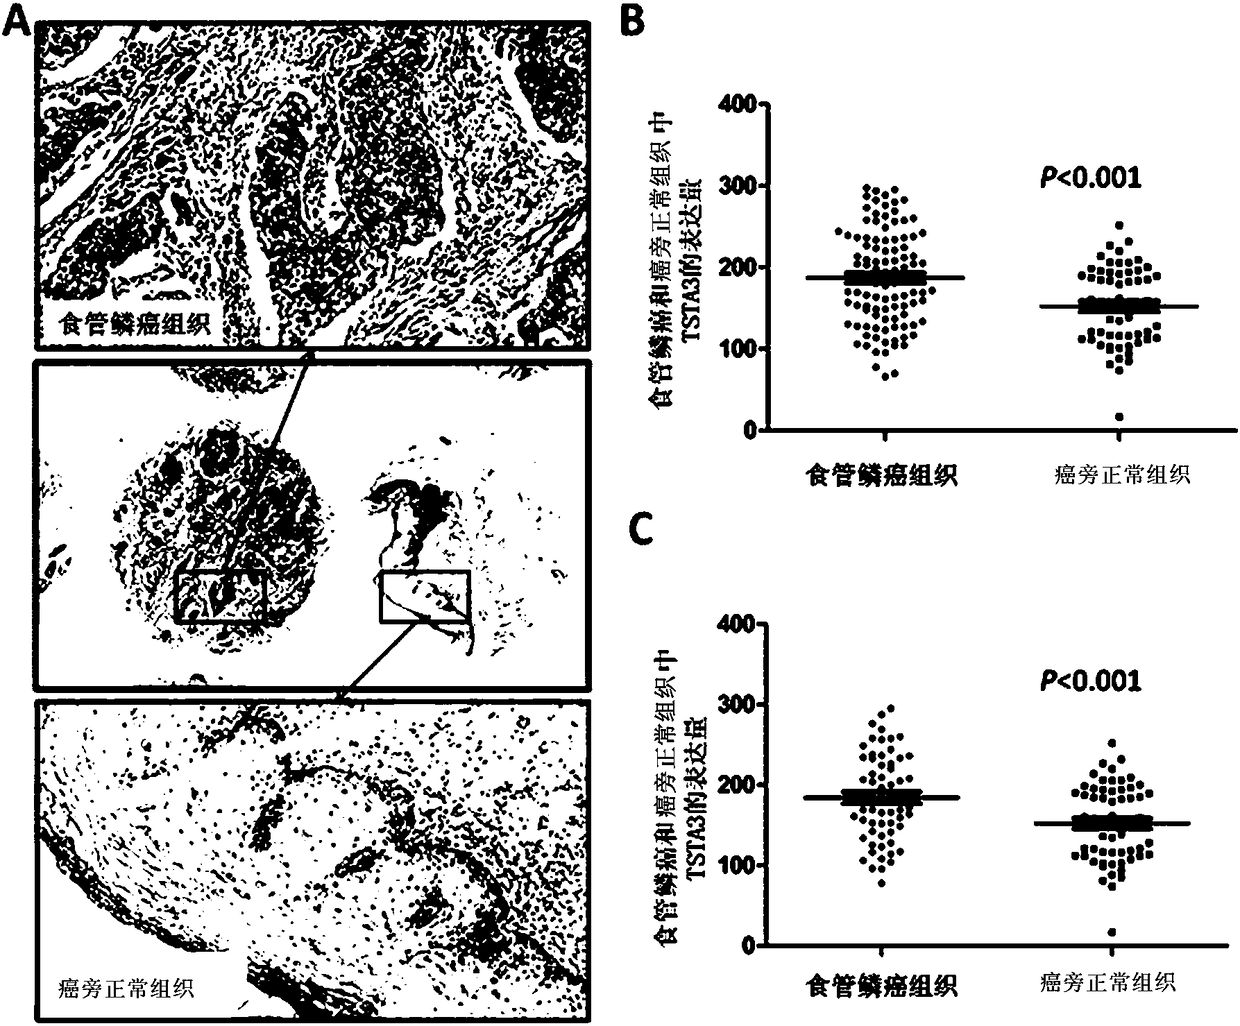 Application of tumor-specific transplantation antigen protein tsta3 in the preparation of diagnostic reagents for esophageal squamous cell carcinoma